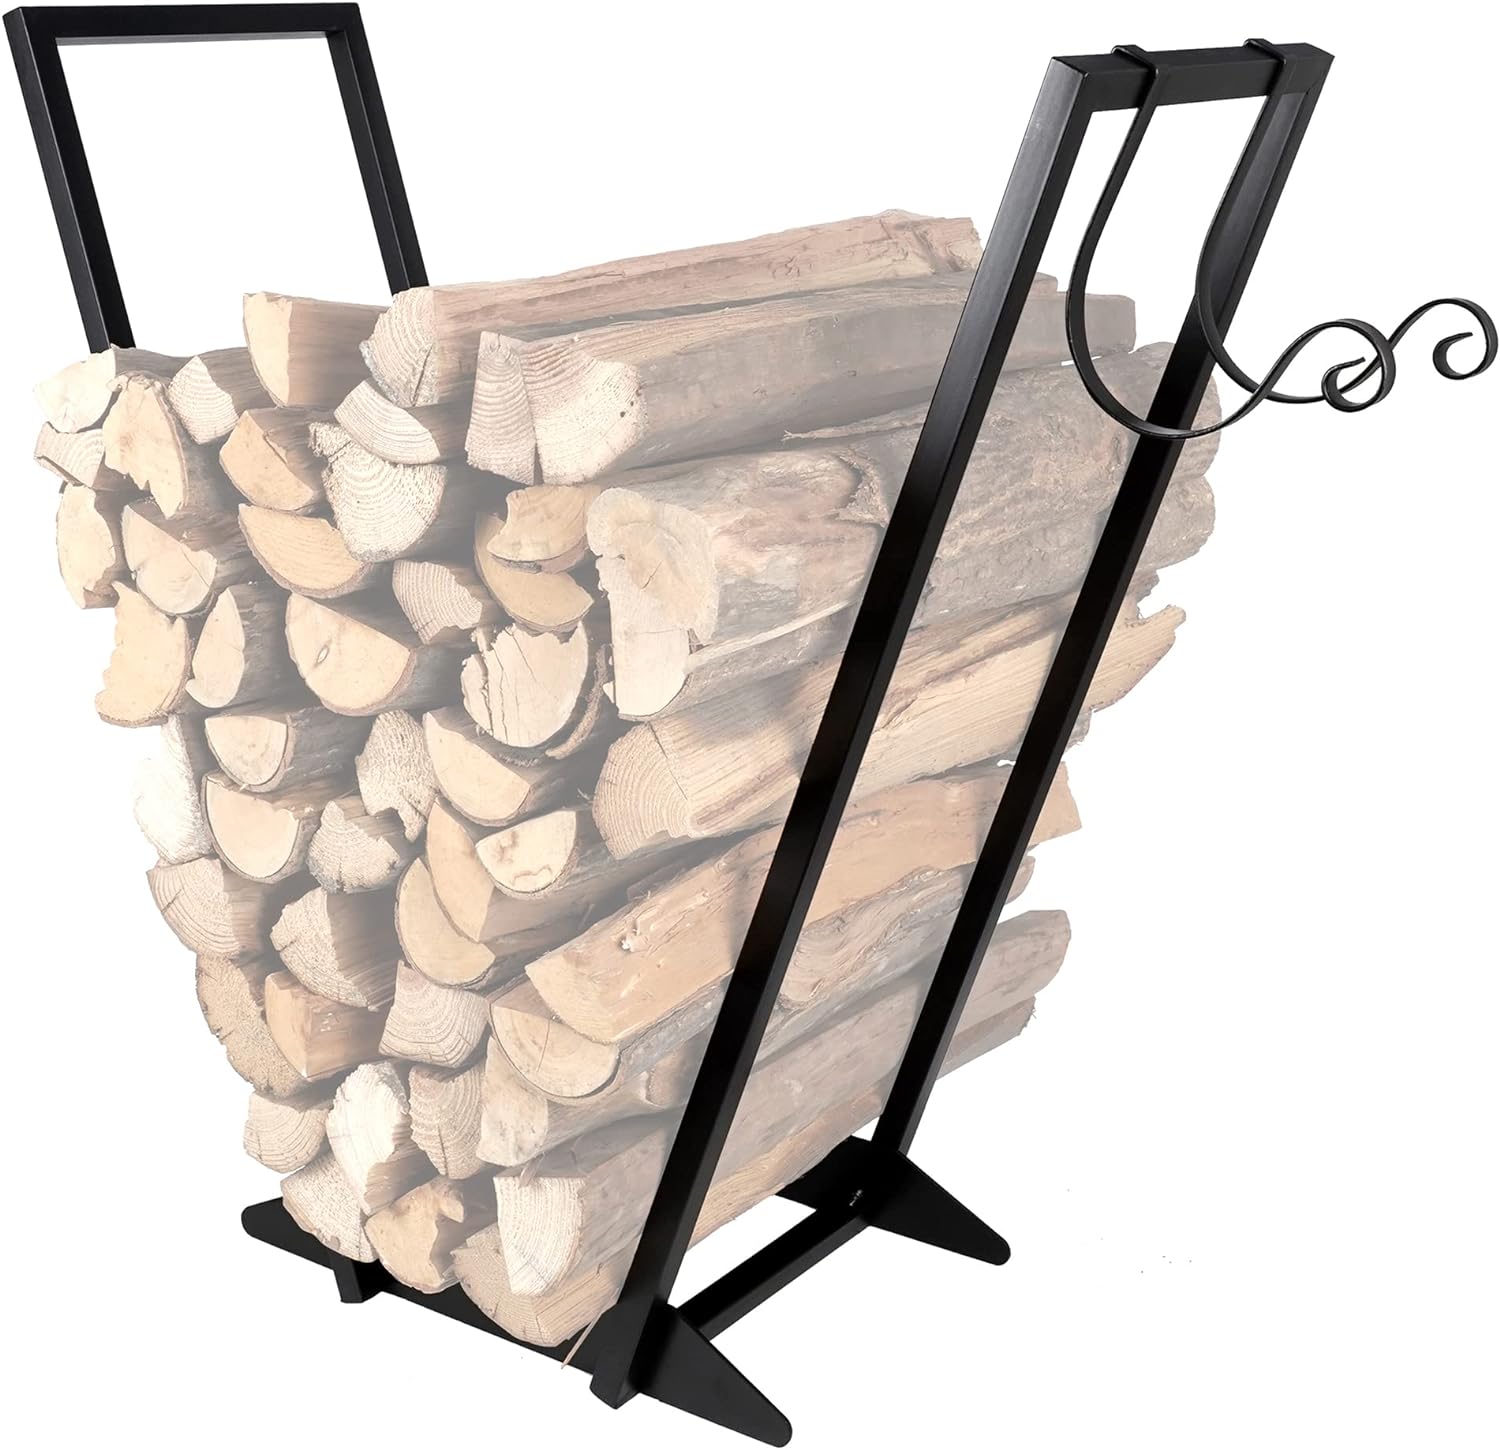 33 inch Firewood Rack Heavy Duty Log Holder Rack Indoor Outdoor for Fireplace & Fire Pit Wood Storage